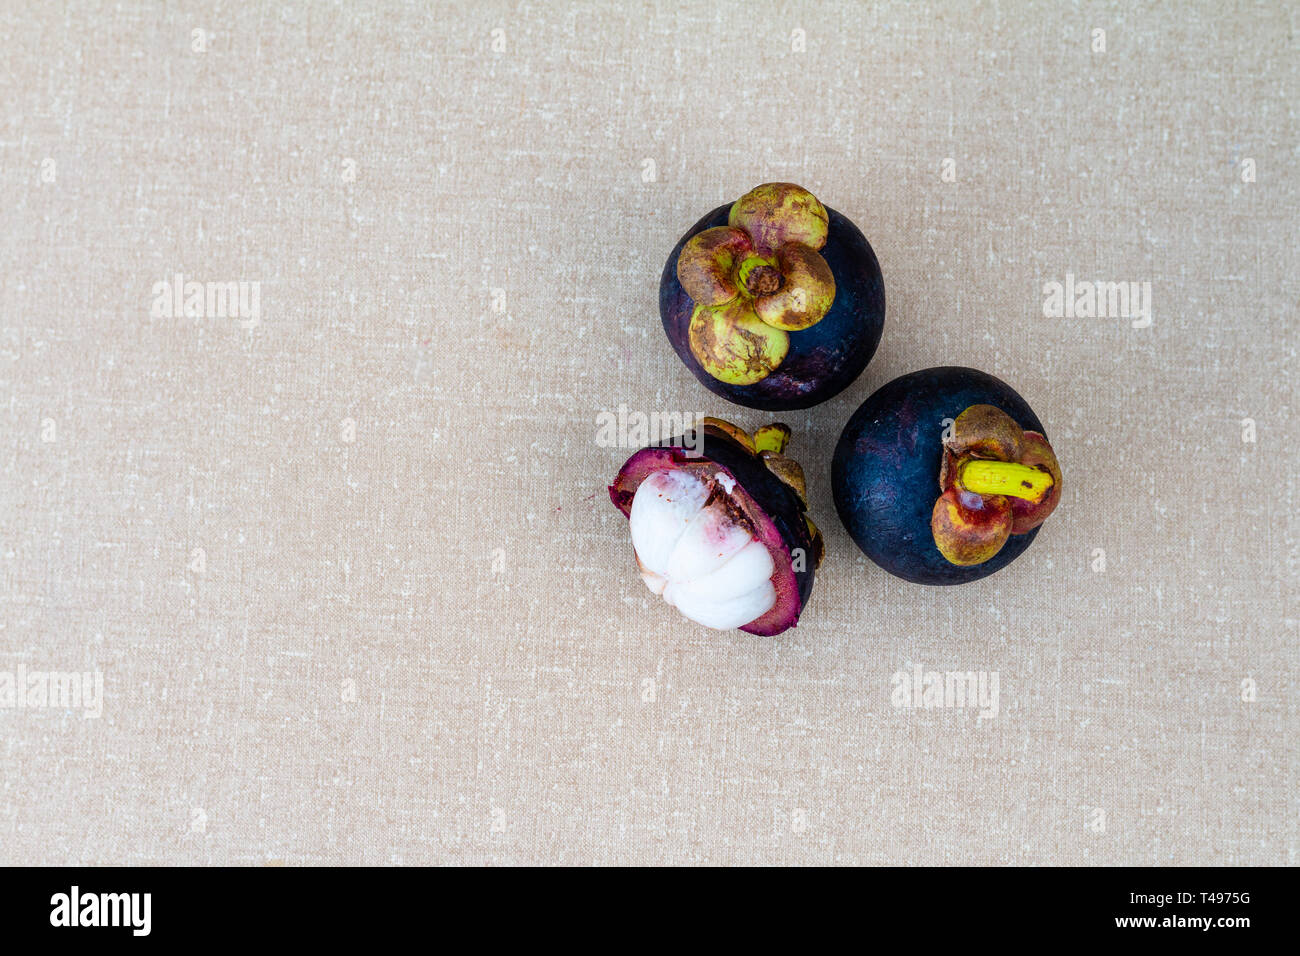 Mangosteen, also known as the purple mangosteen, is a tropical evergreen tree believed to have originated in the Sunda Islands of the Malay archipelag Stock Photo